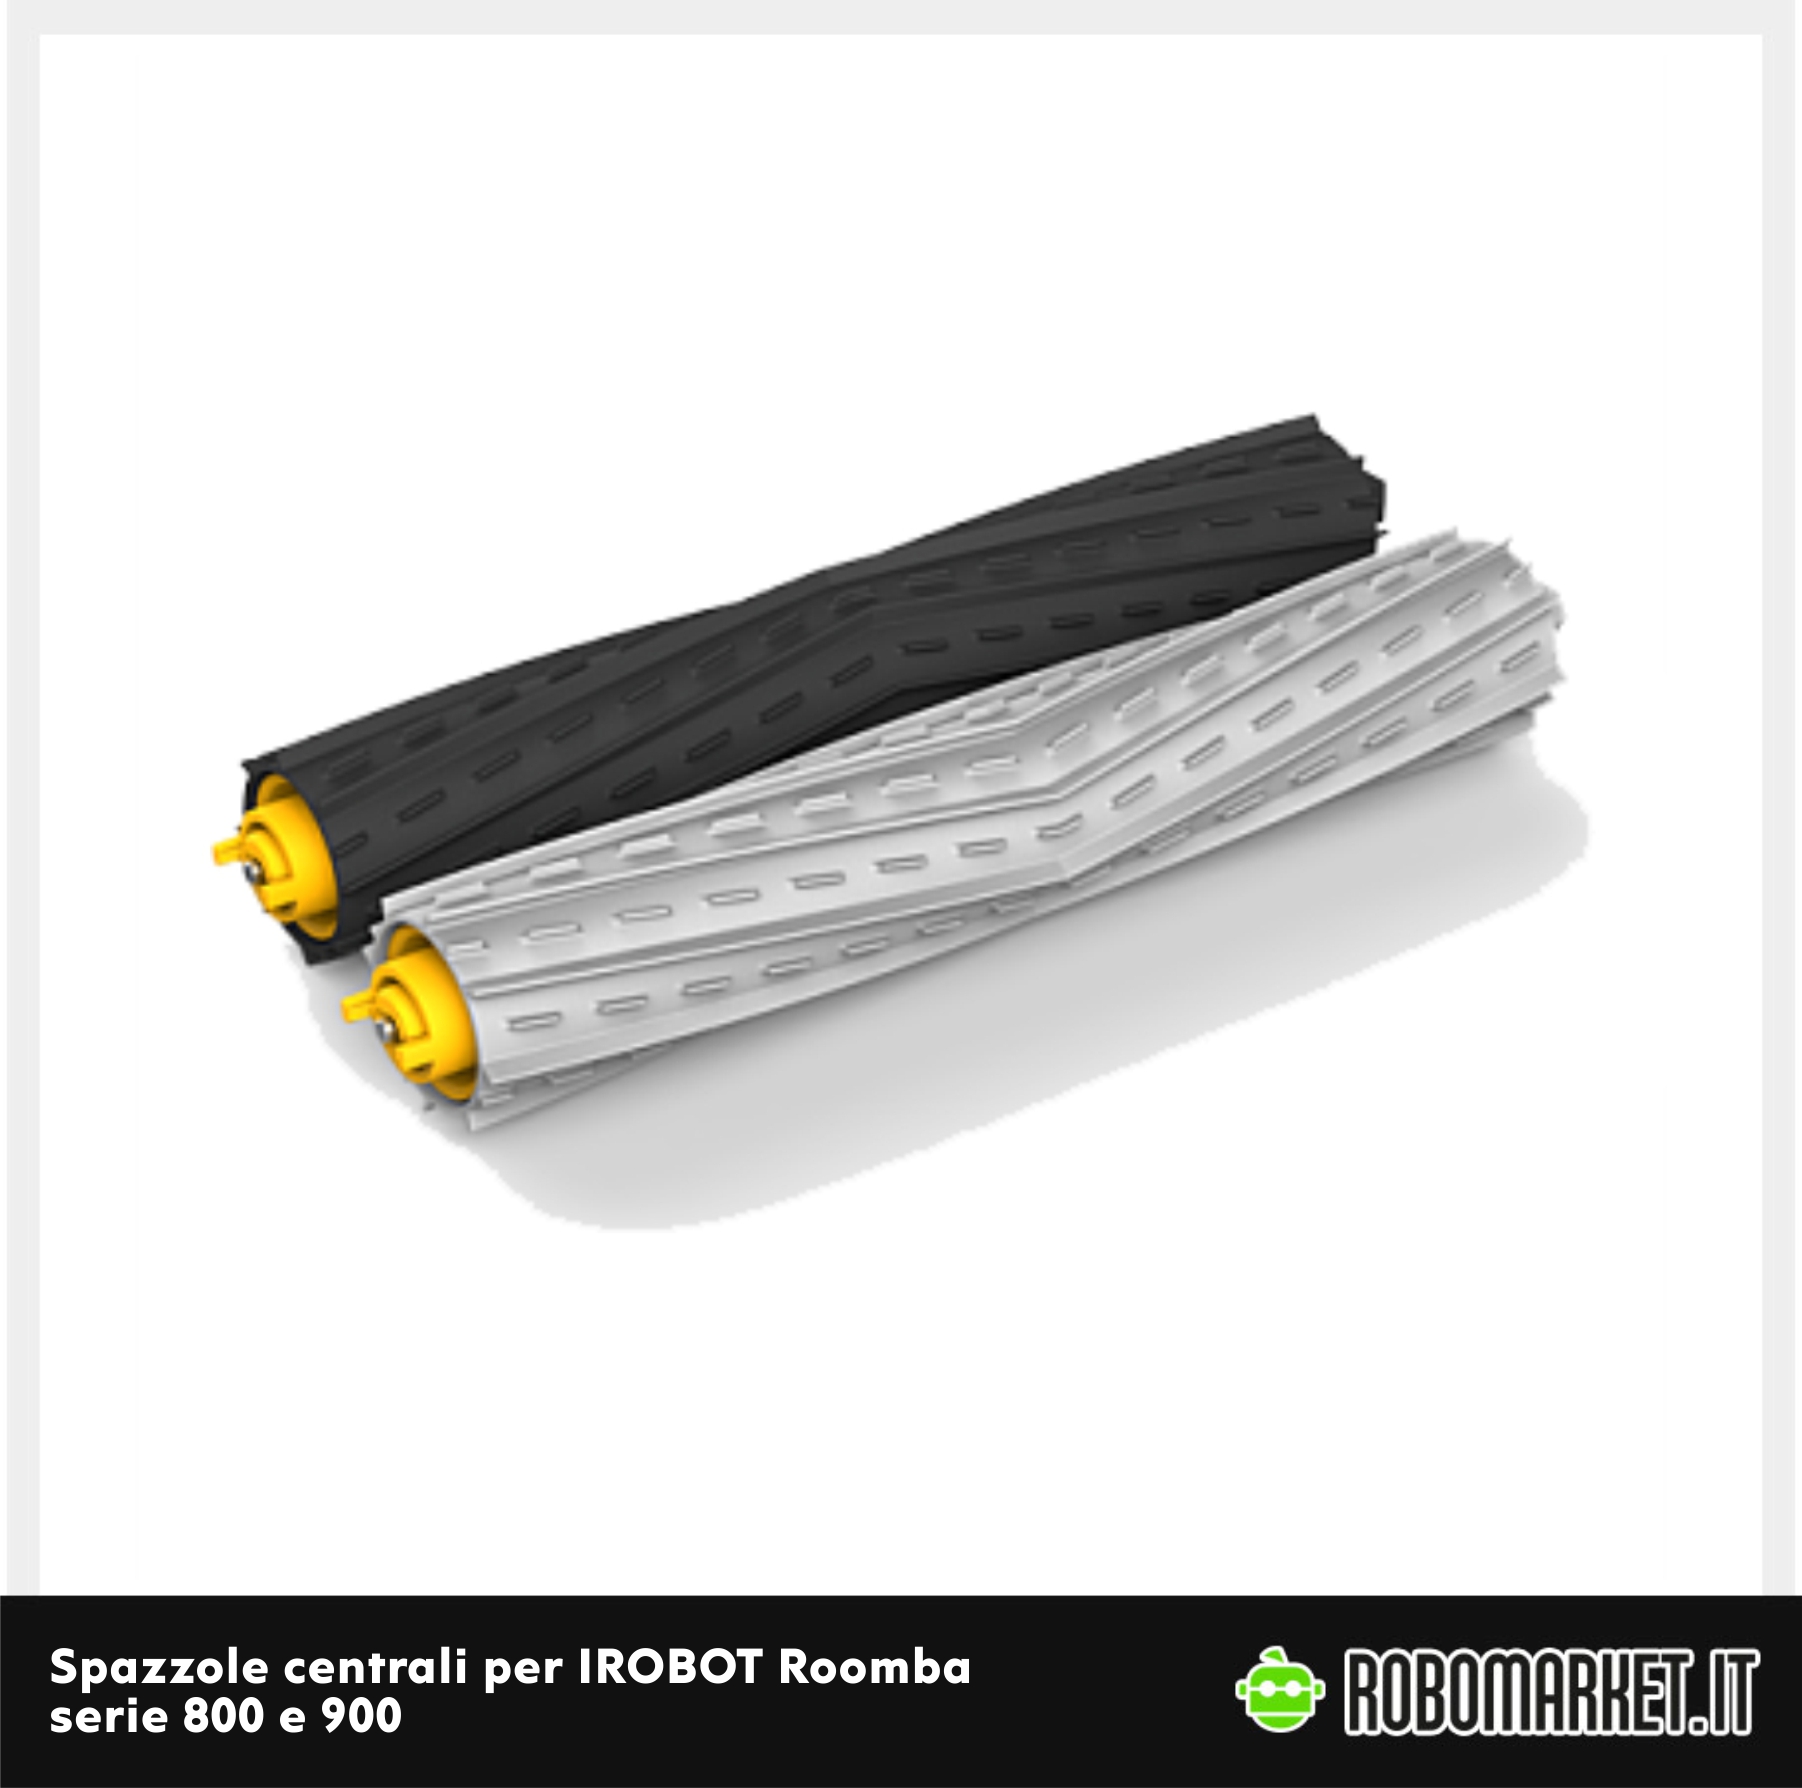 https://robomarket.it/wp-content/uploads/2018/05/pack-spazzole-centrali-per-roomba-serie-800.jpg